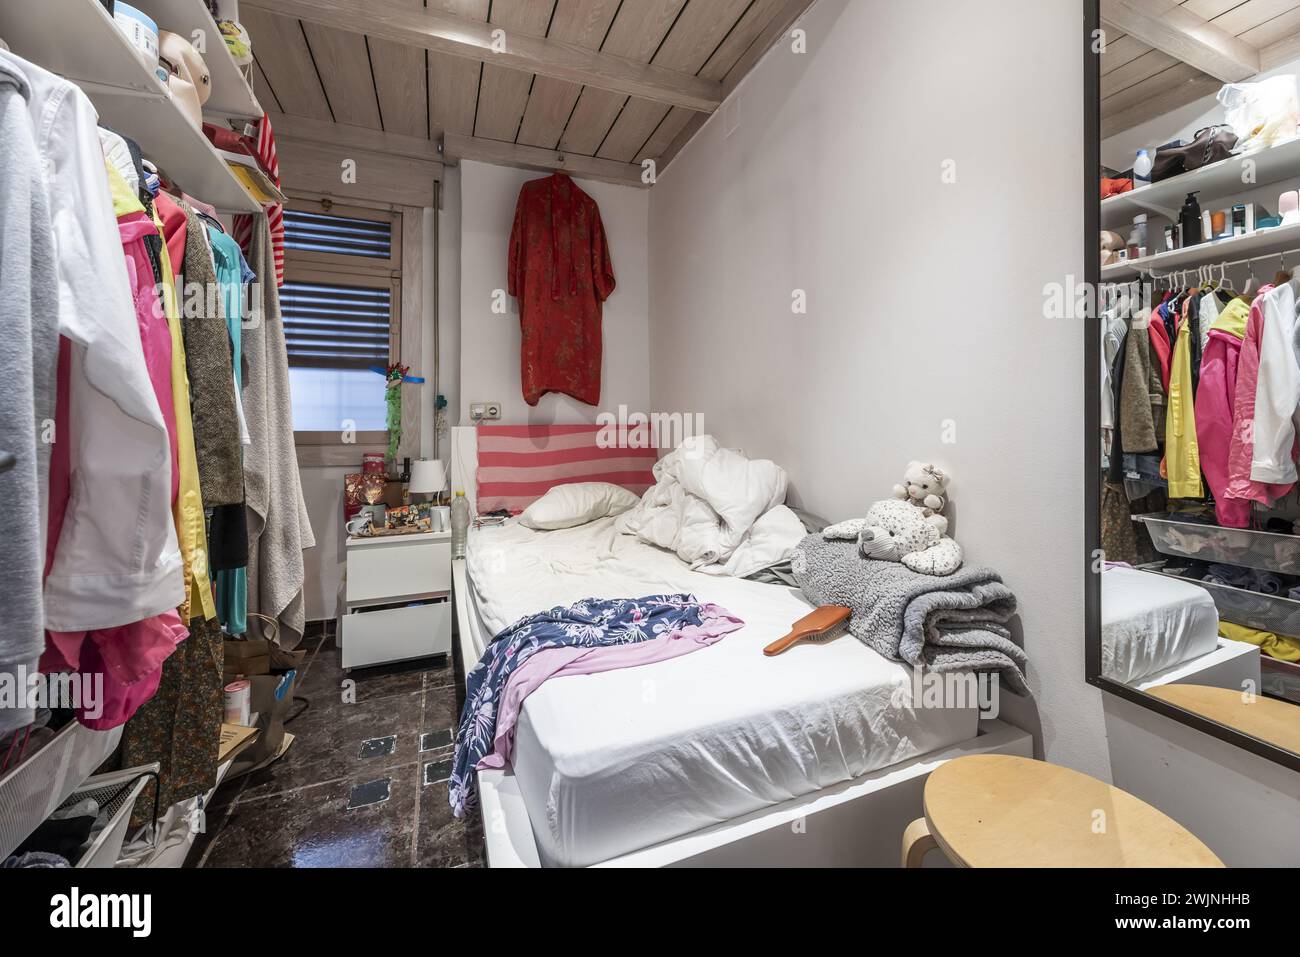 Very small bedroom with a single bed with a large mess of clothes on the mattress, clothes hanging on a hanger and ceilings with tongue and groove woo Stock Photo